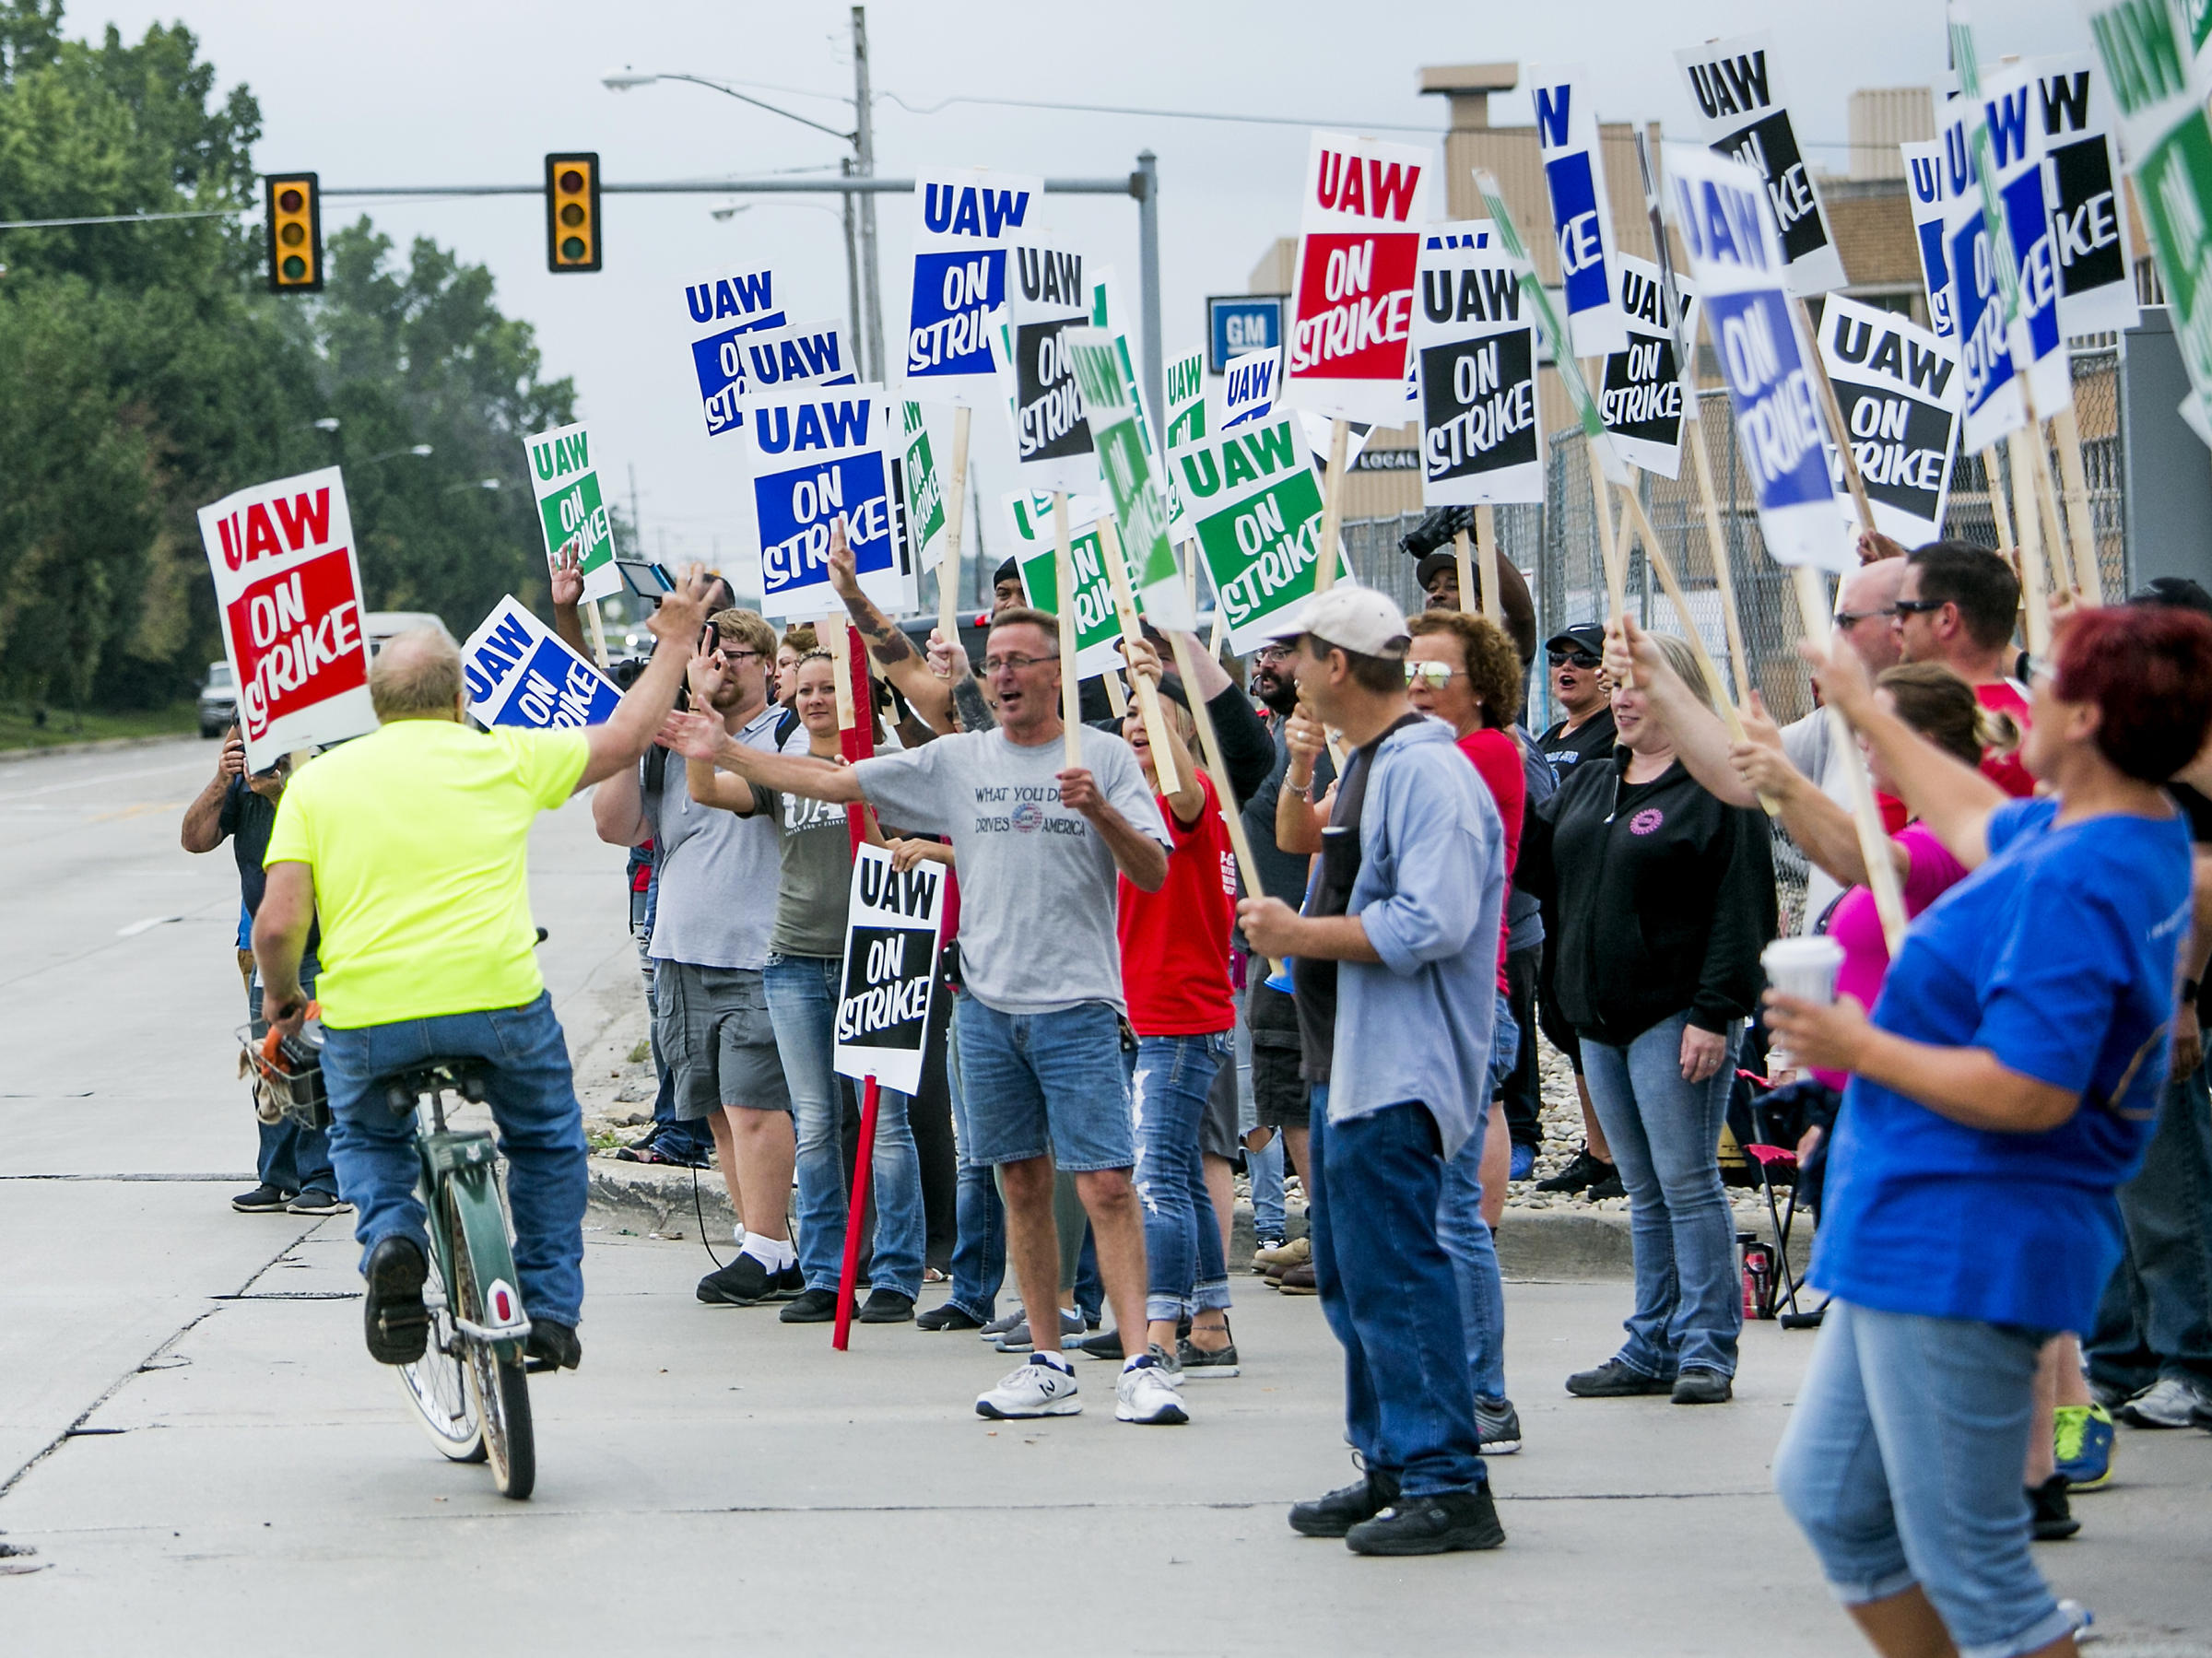 In GM Strike, Union Says Only 2 Of Deal Has Been Agreed To, 'We're Far